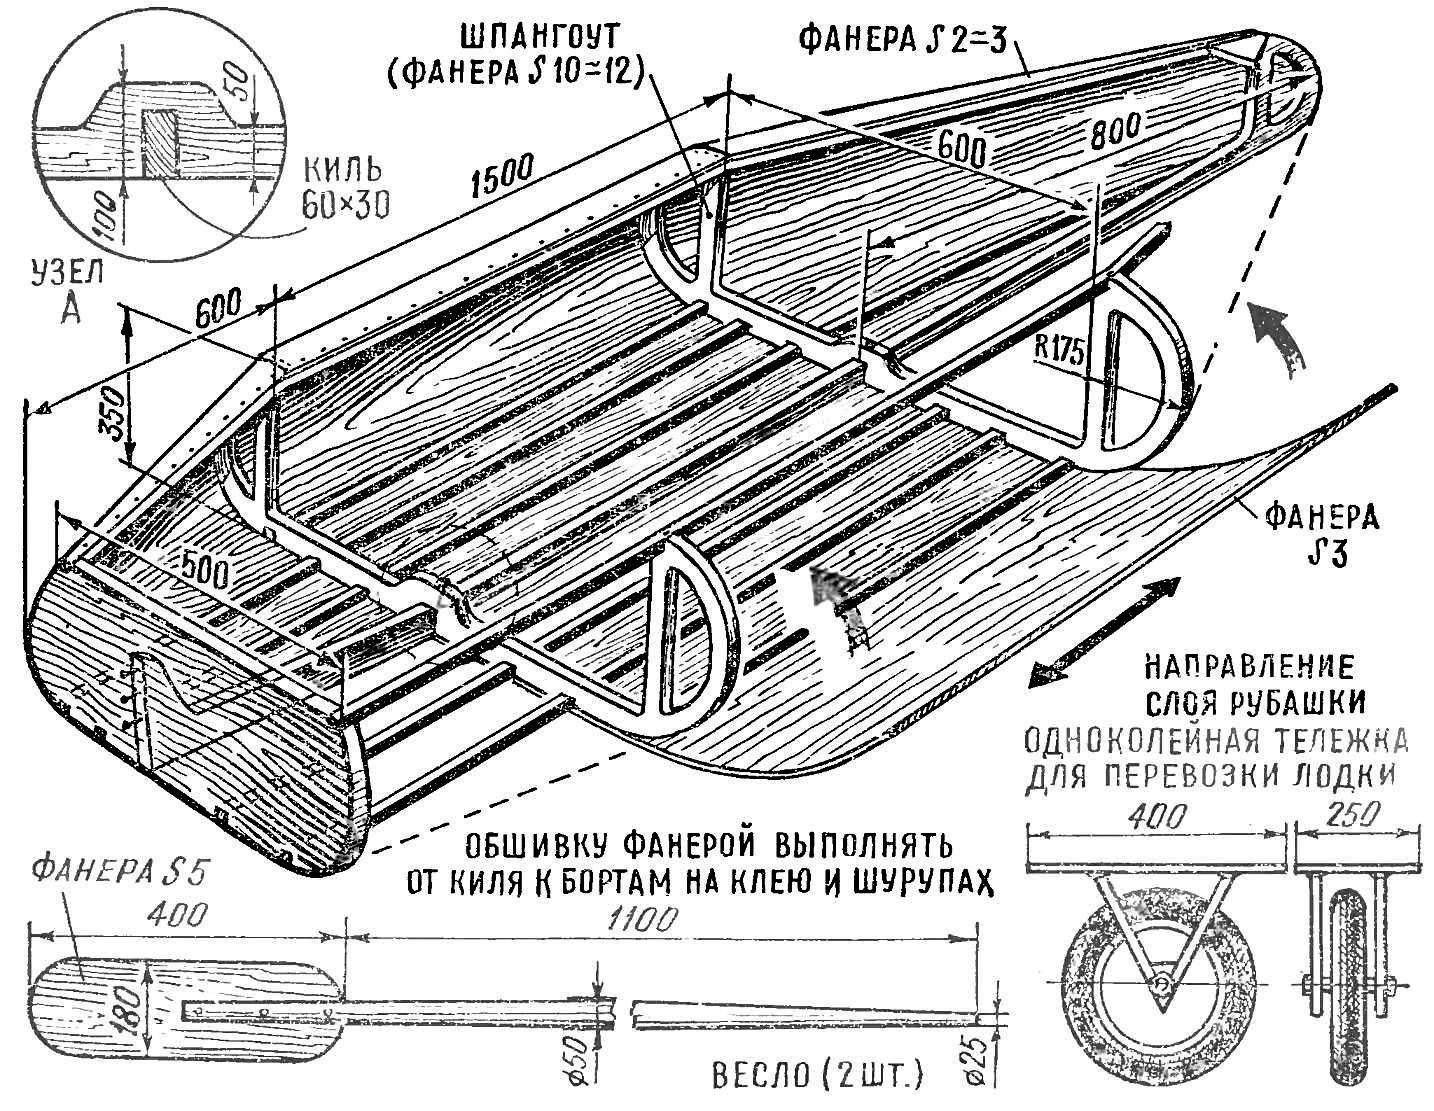 The frame of the boat and its hull.